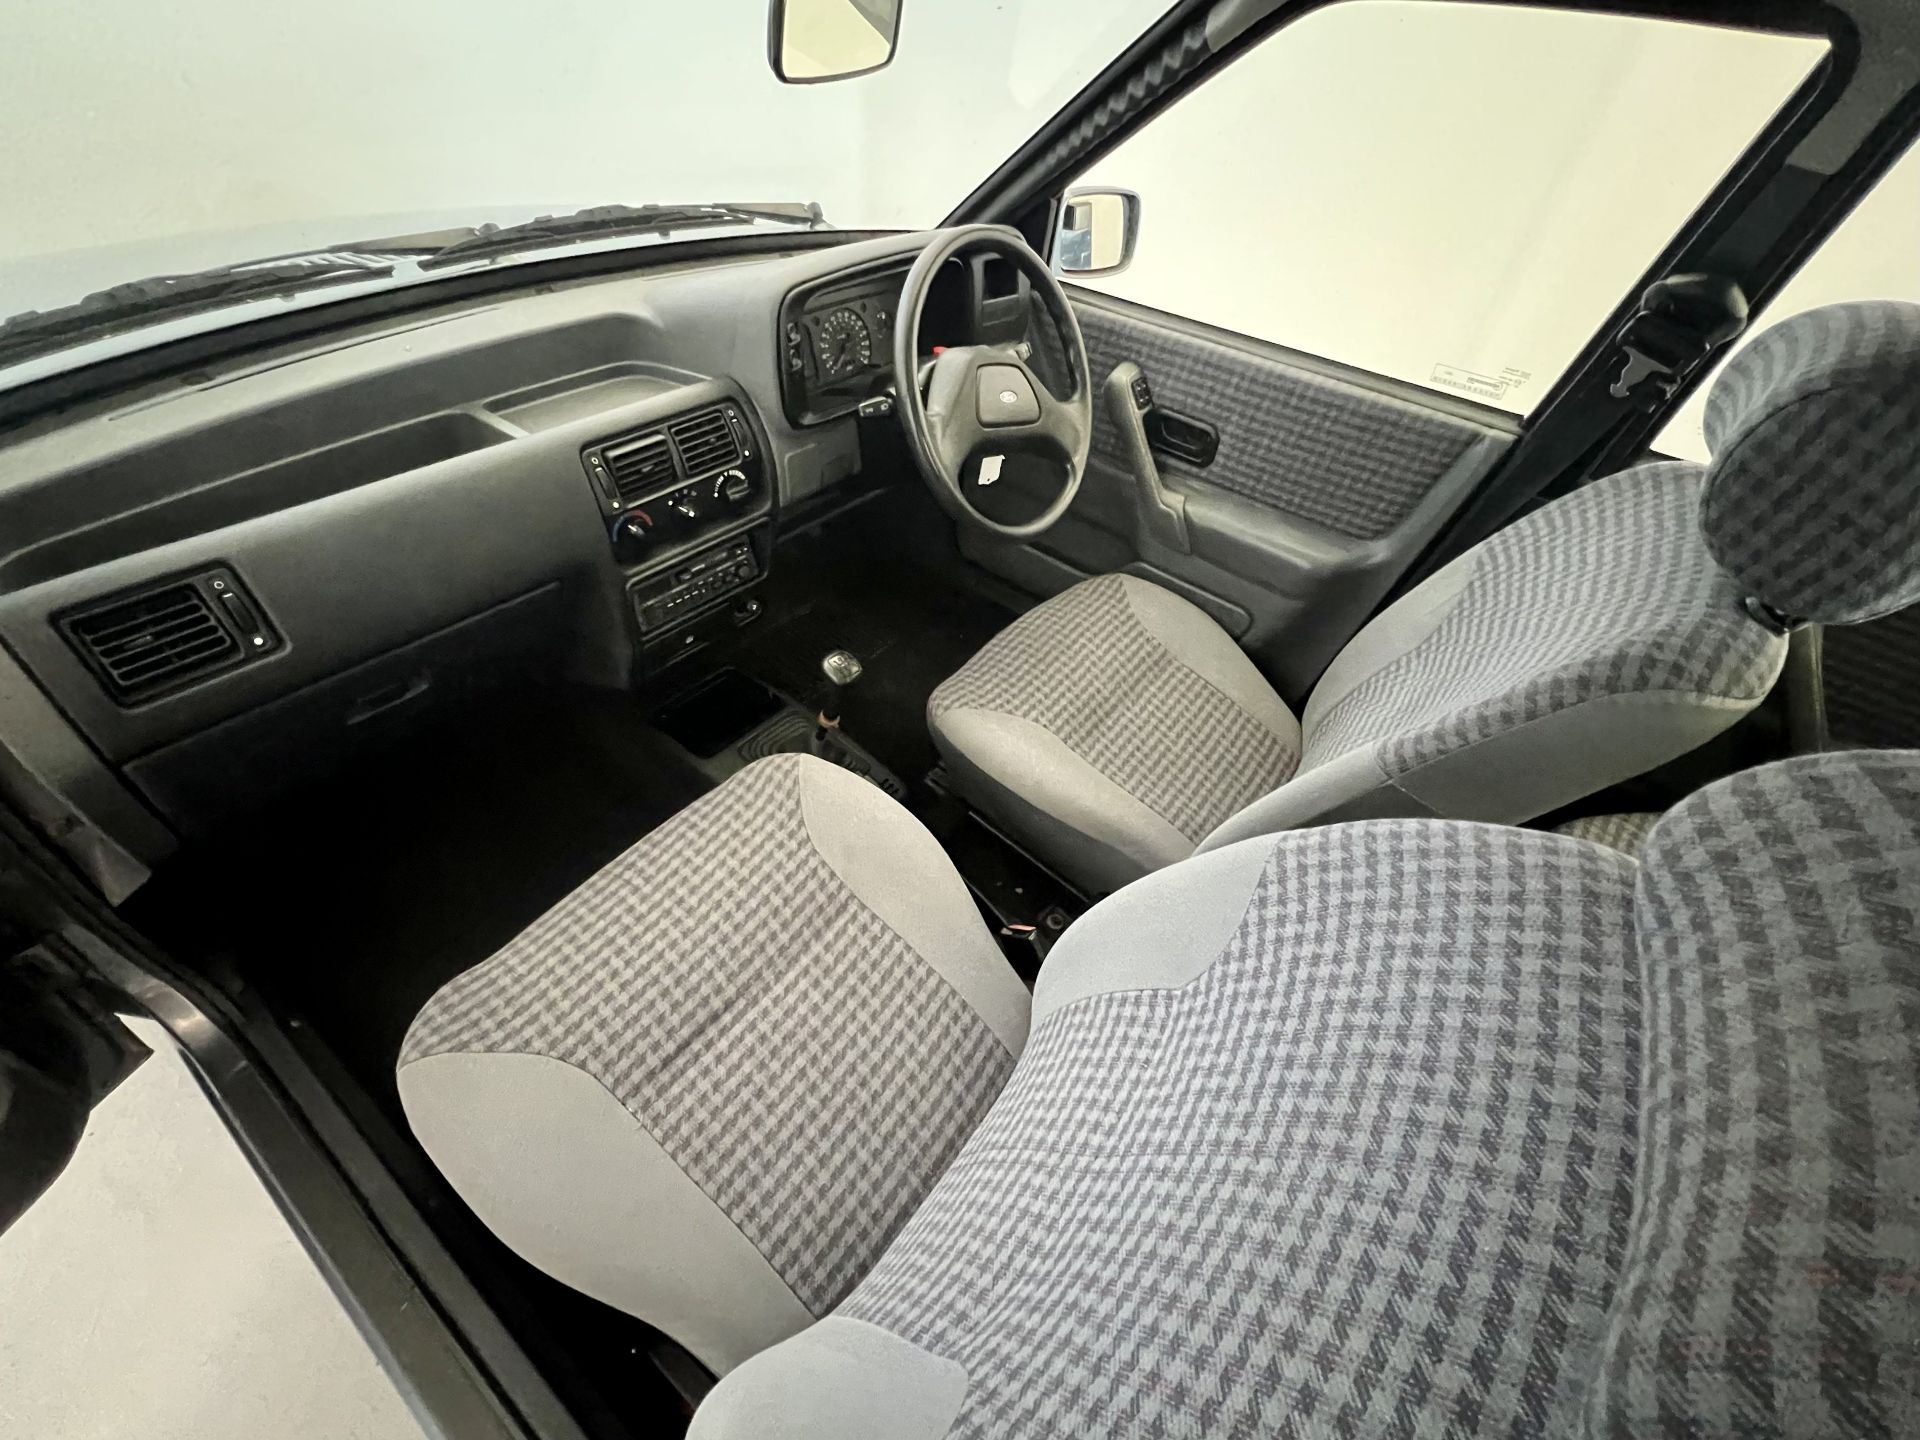 Ford Orion DX - Image 27 of 34